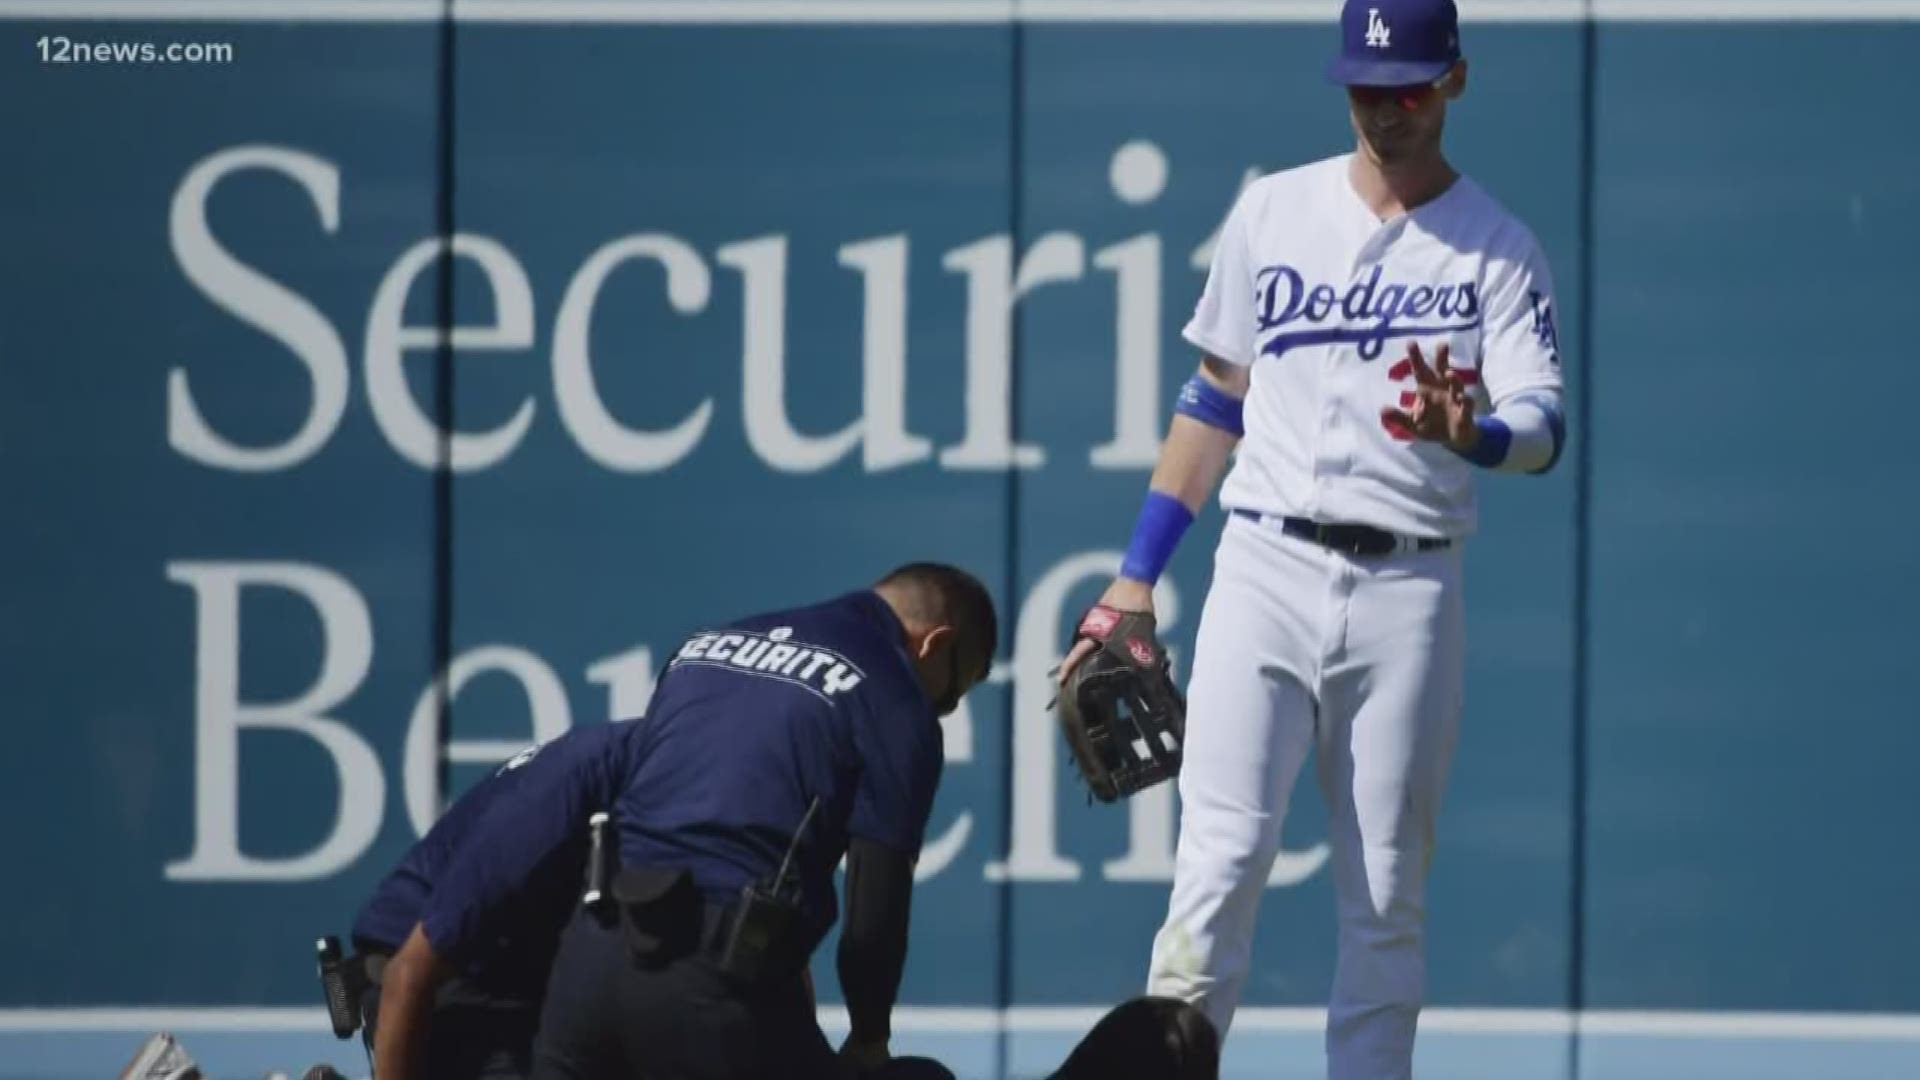 Two young women in two days have charged LA Dodgers player Cody Bellinger while he was on the field this week. One of the women, 18-year-old Madison Alyssa Louis Aranda, charged the field at Chase Stadium when the Dodgers were playing the Diamondbacks Monday evening. Aranda was arrested and charged with criminal trespassing and disorderly conduct.